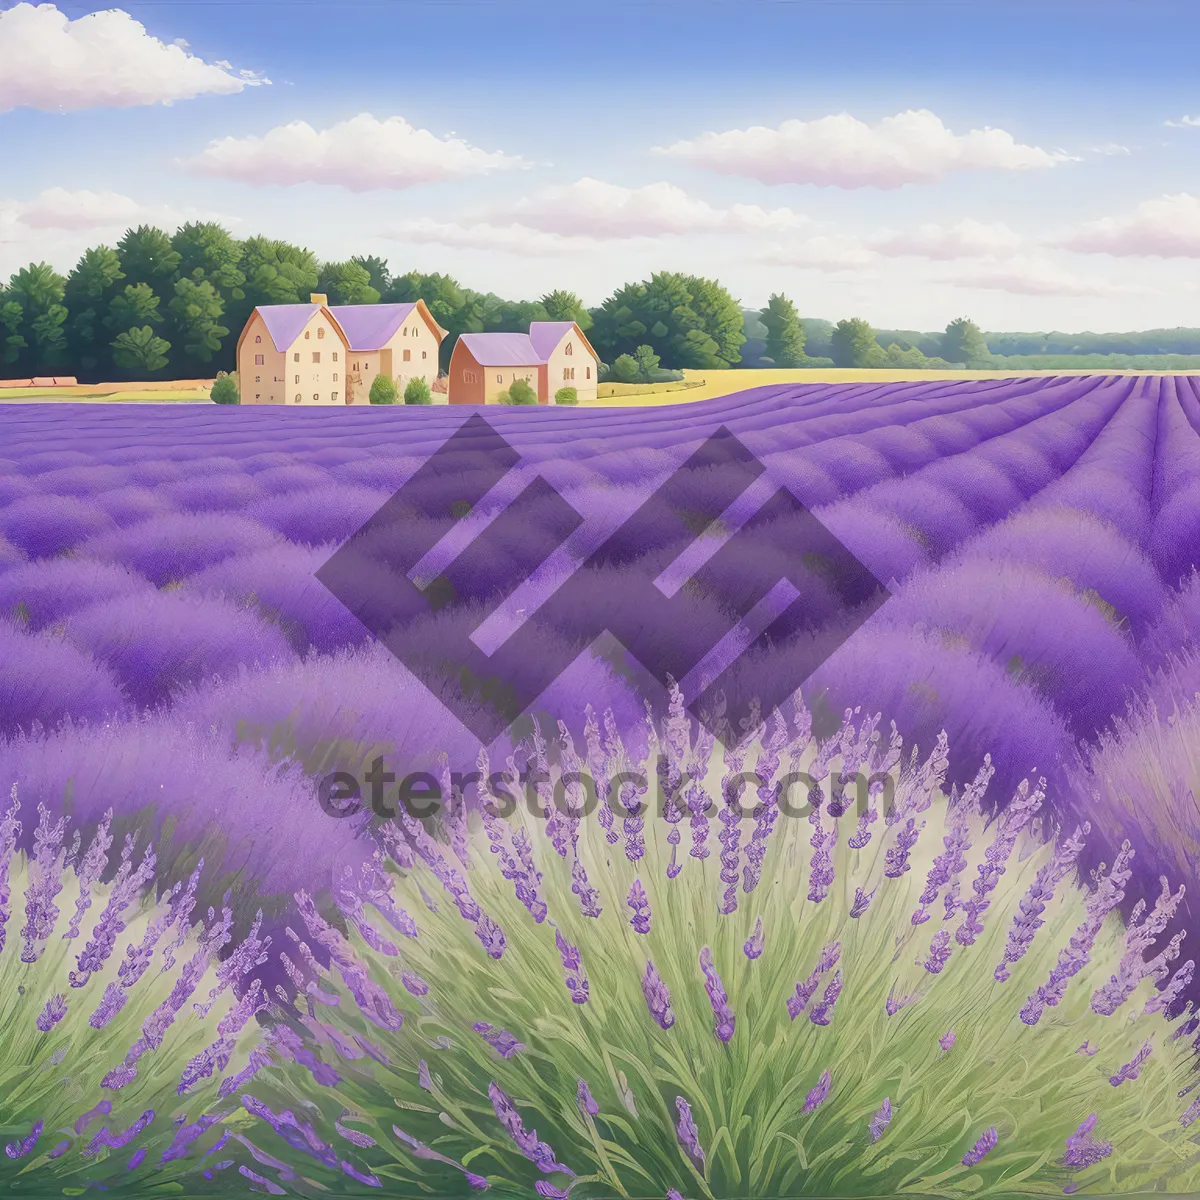 Picture of Majestic Lavender Blooms in Colorful Field